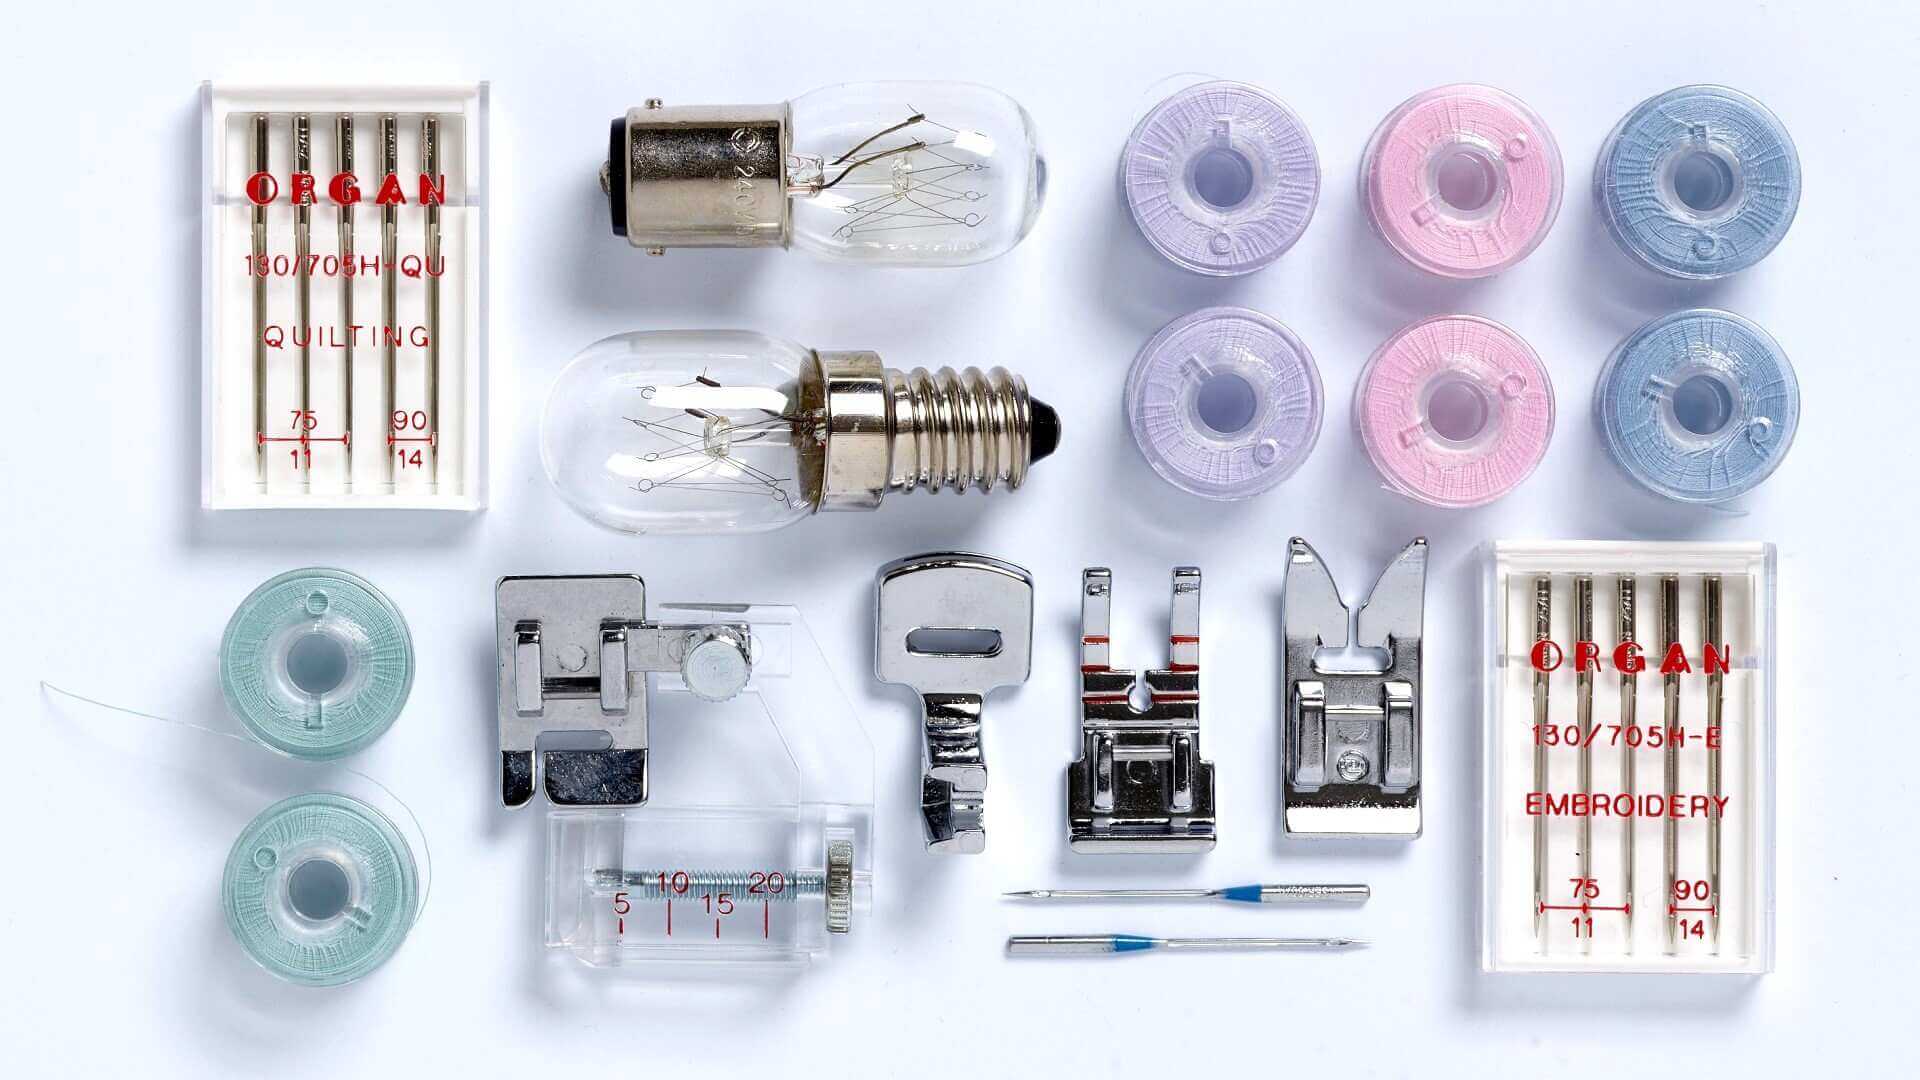 Understanding Your Sewing Machine: Guide To Parts & Accessories